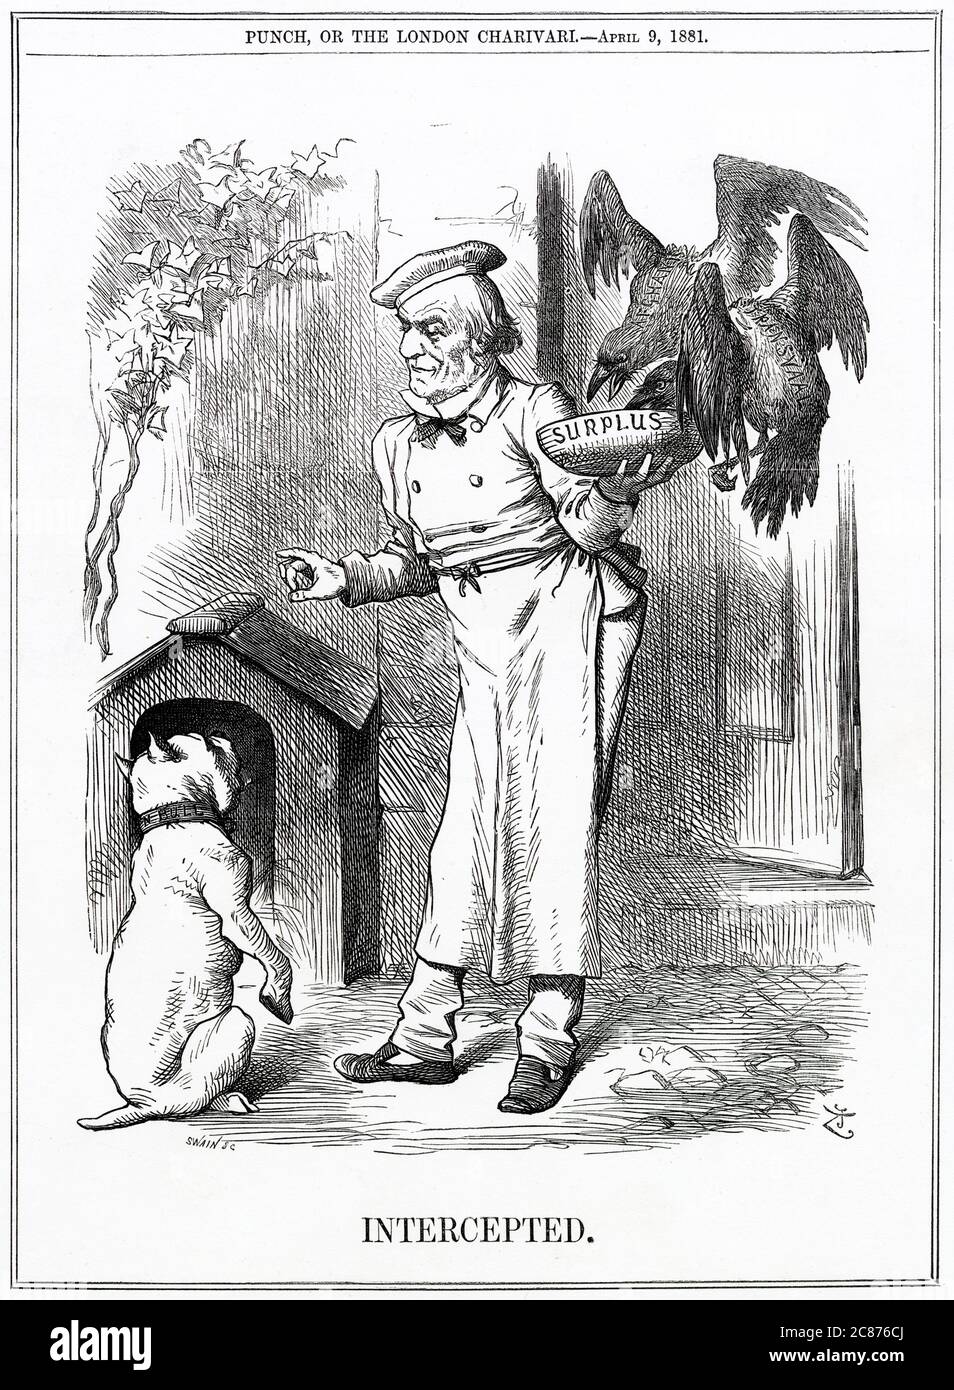 Cartoon, Intercepted -- a satirical comment on Gladstone as Liberal Prime Minister and Chancellor of the Exchequer, with a budgetary surplus. He is depicted here as a chef, intending to give the surplus to John Bull (bulldog), not noticing that two hungry birds, representing conflicts in Afghanistan and Transvaal, are already pecking at the bowl's contents. Stock Photo